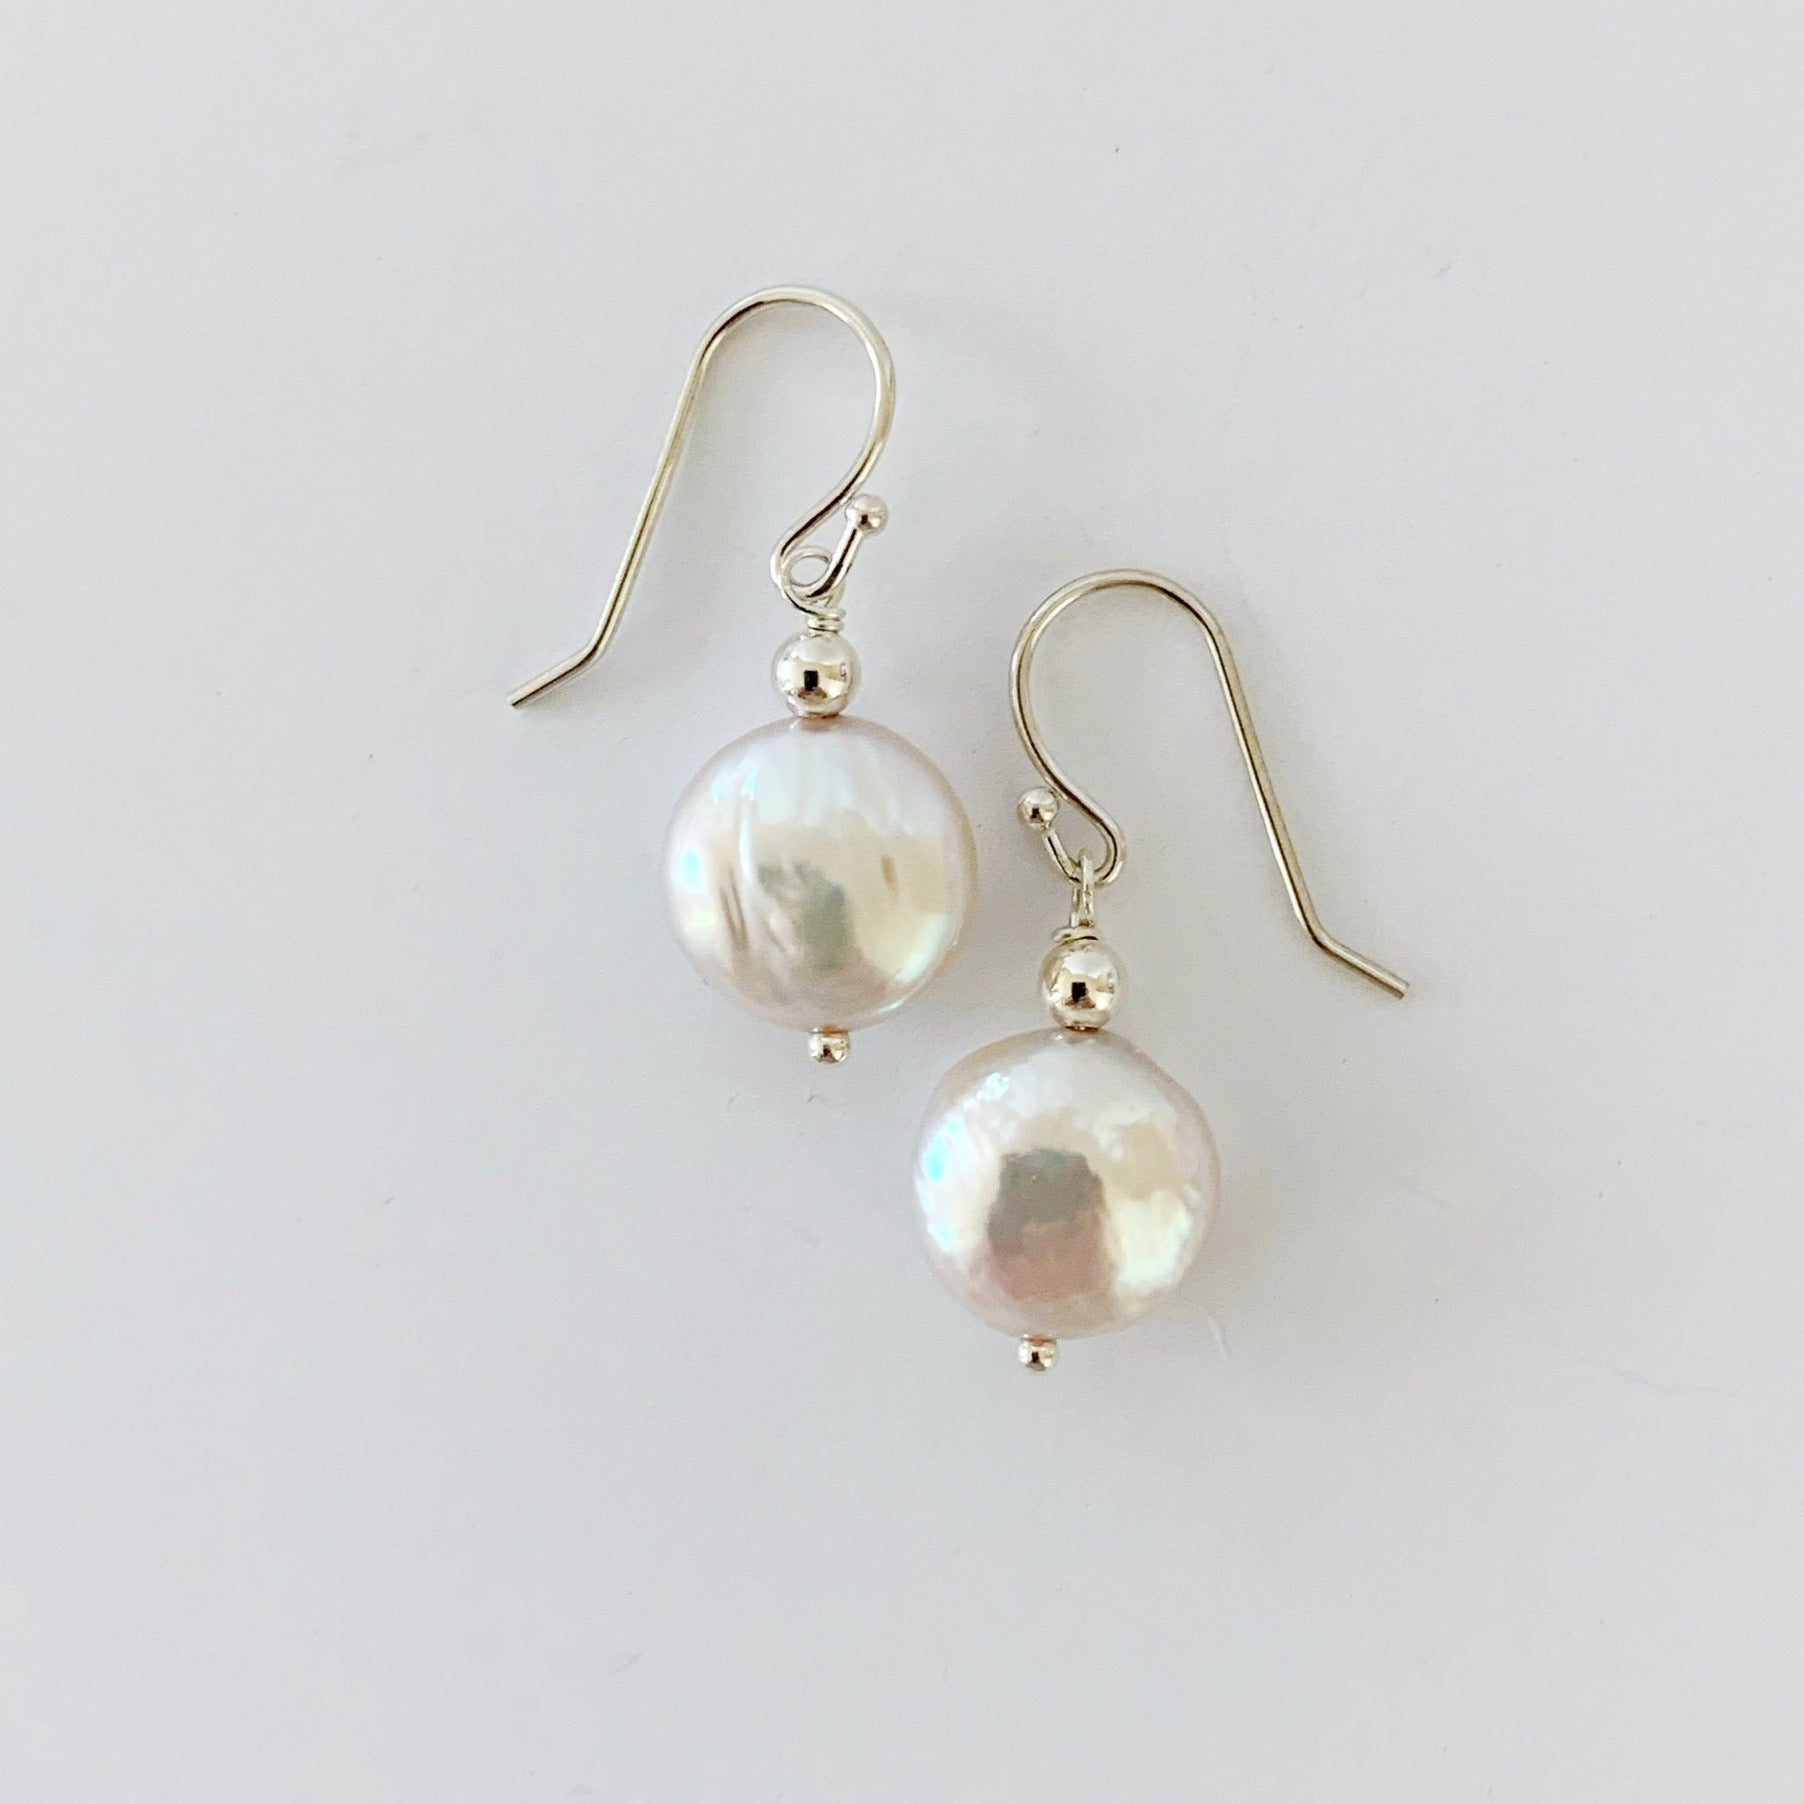 Newport earrings in sterling silver. This pair of earrings is created with sterling silver beads and earring findings with iridescent freshwater coin pearls. This pair is photographed on a white background